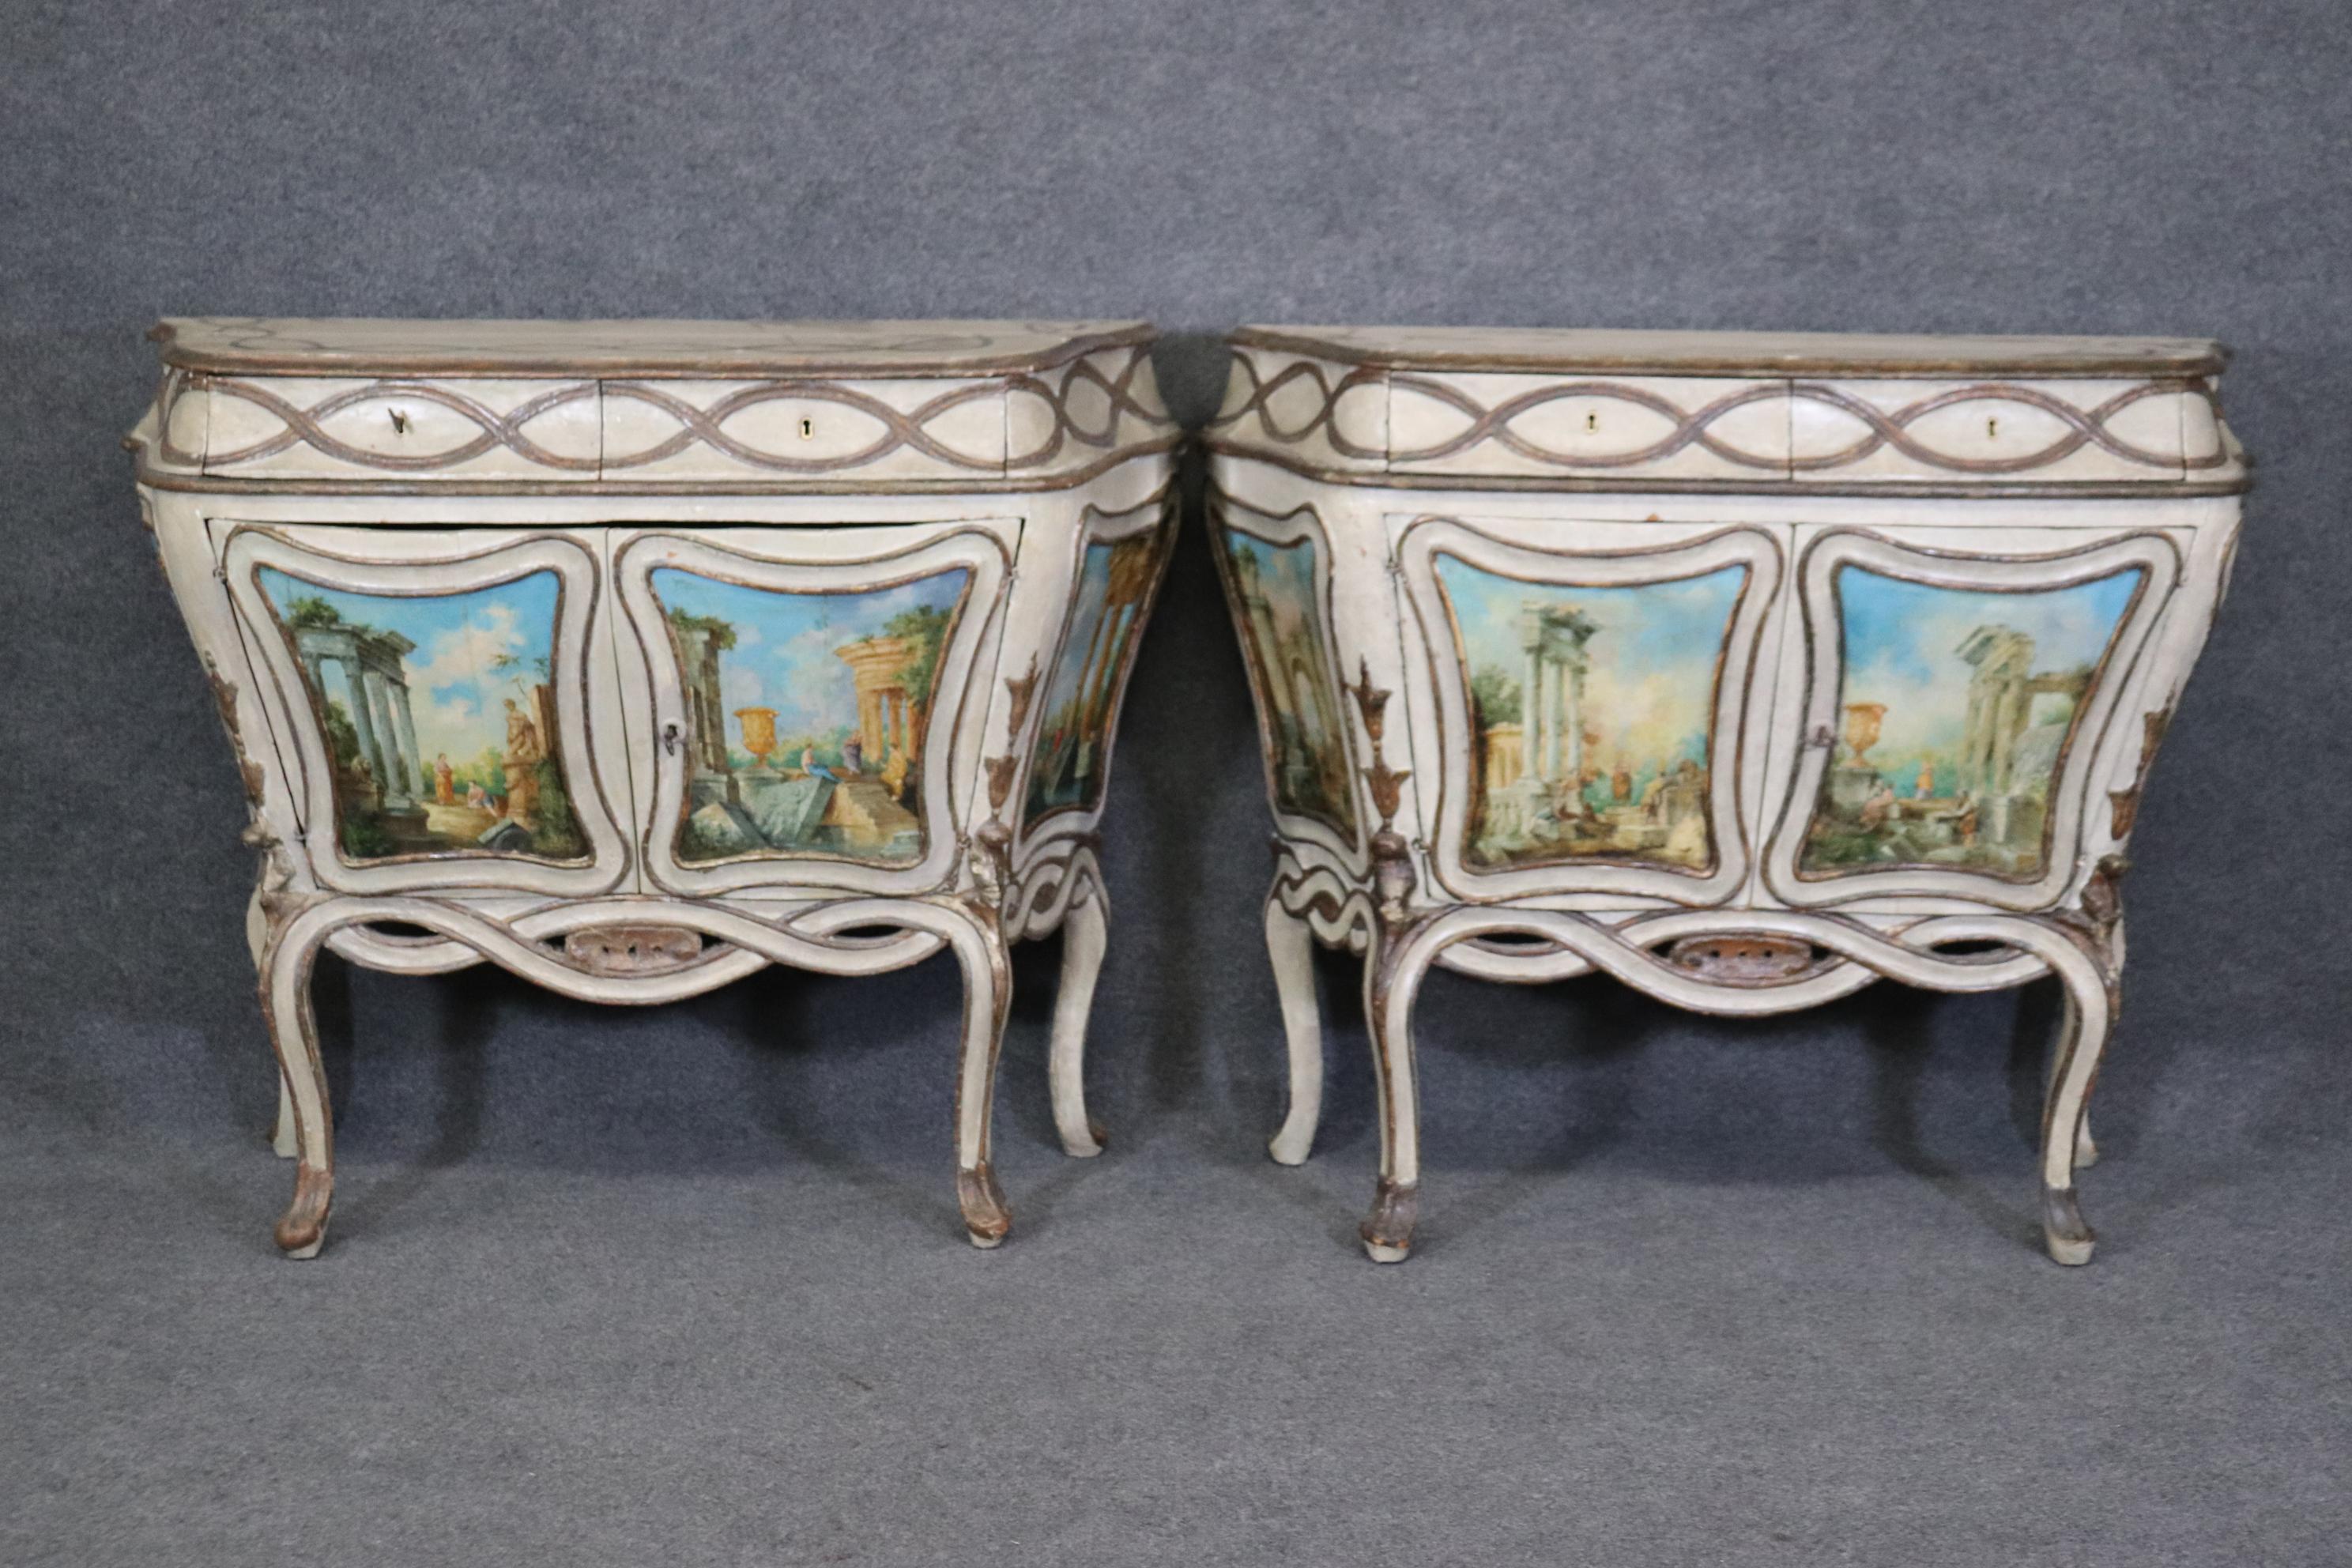 Rare Pair Period 18th Century Paint Decorated  Venetian Commodes Cabinets In Good Condition For Sale In Swedesboro, NJ